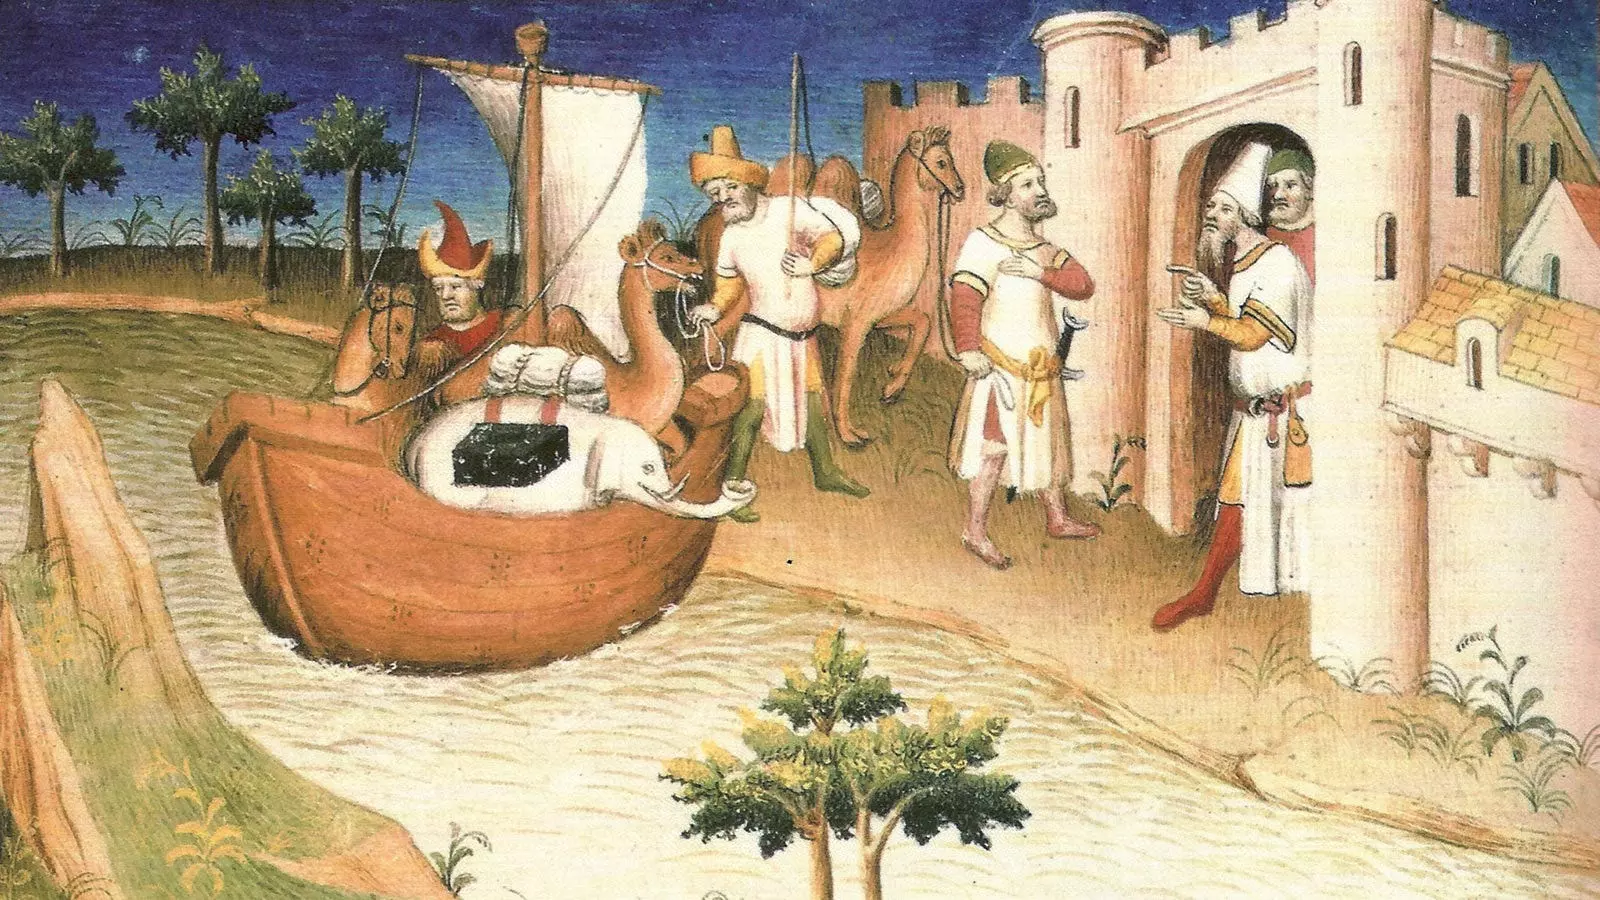 Illustration of Marco Polo